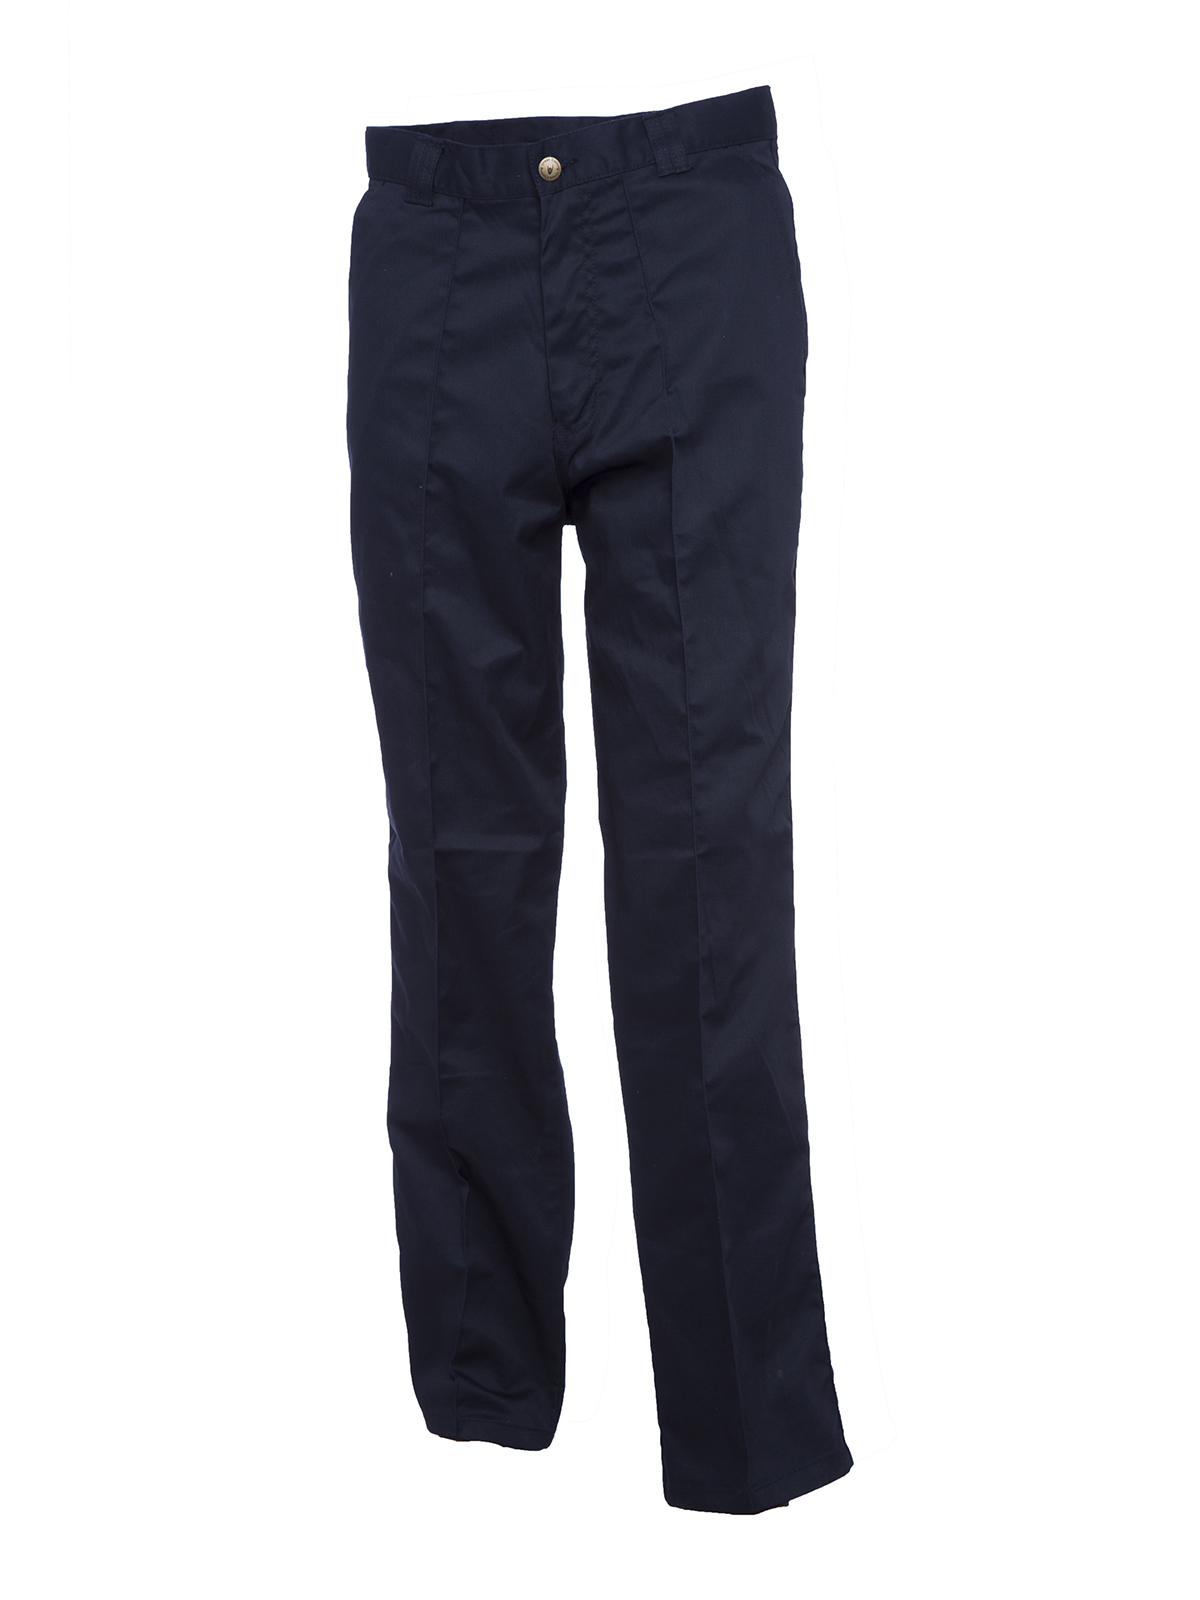 Workwear Trousers, Navy Blue - 48R